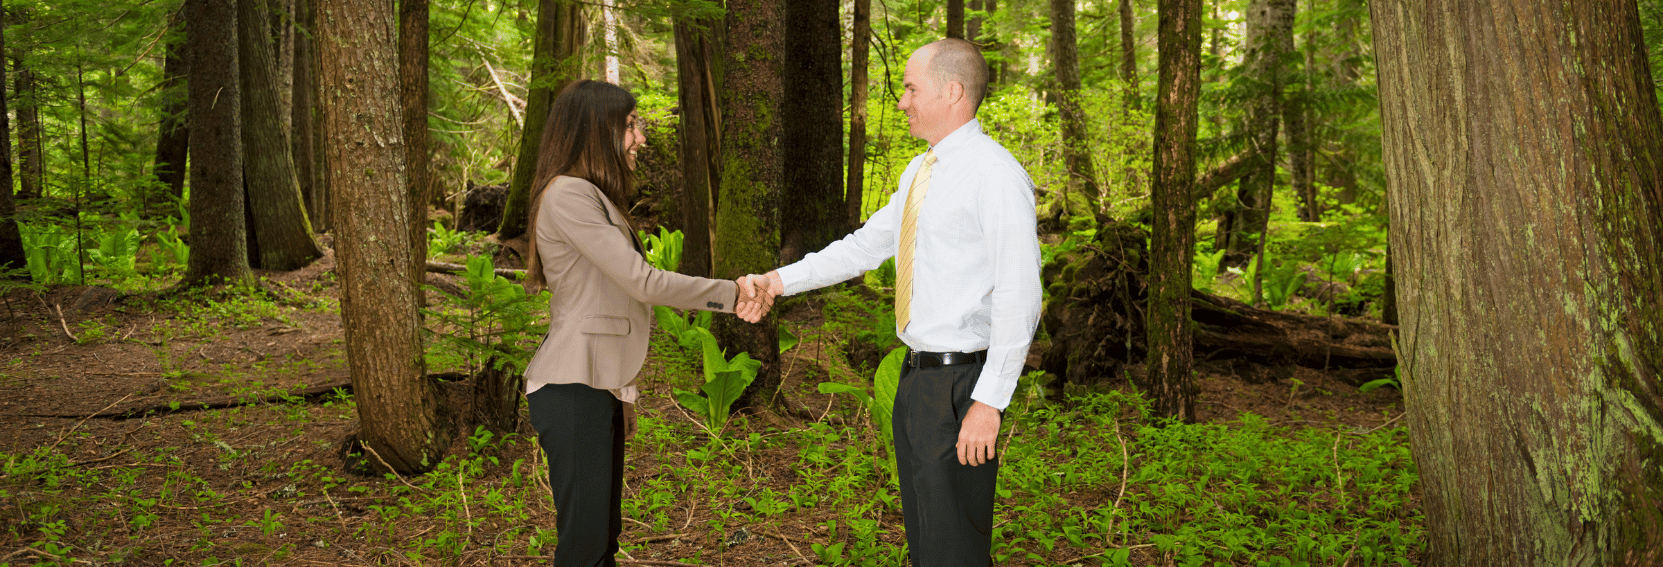 Man and woman shaking hands in a remote forest location